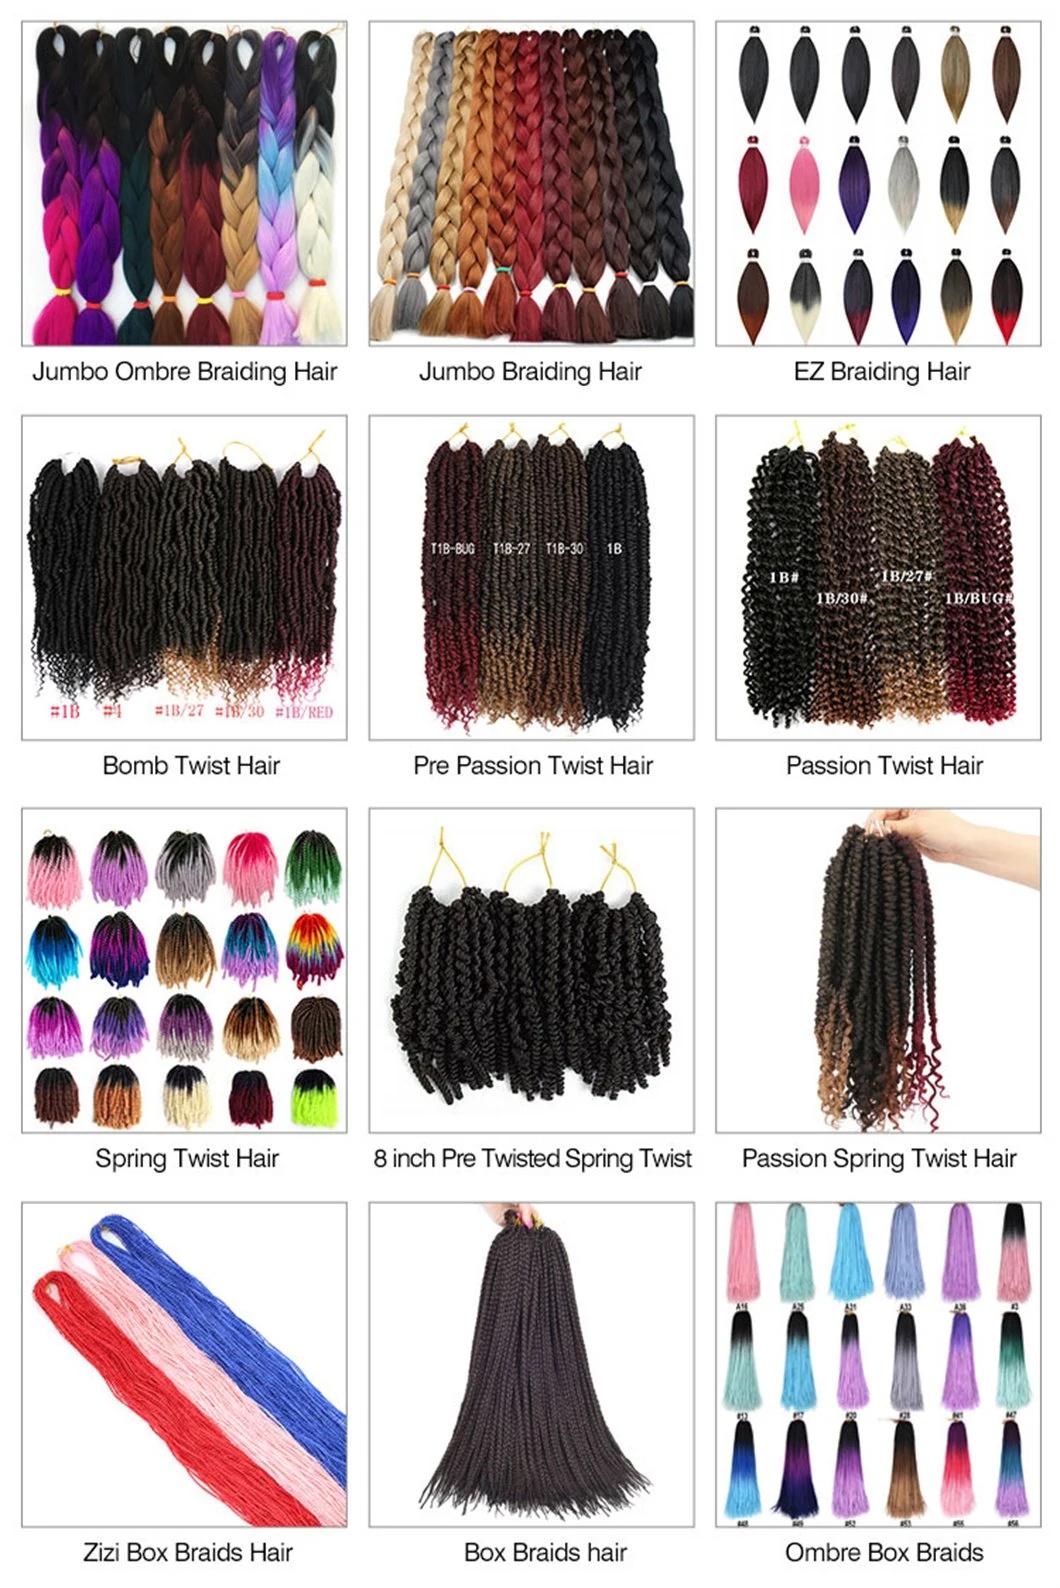 Wholesale Price Wavy Senegalese Twist Crochet Hair Curly Ends 14inch Braids Synthetic Hair Extension Small Mambo Twist Braiding